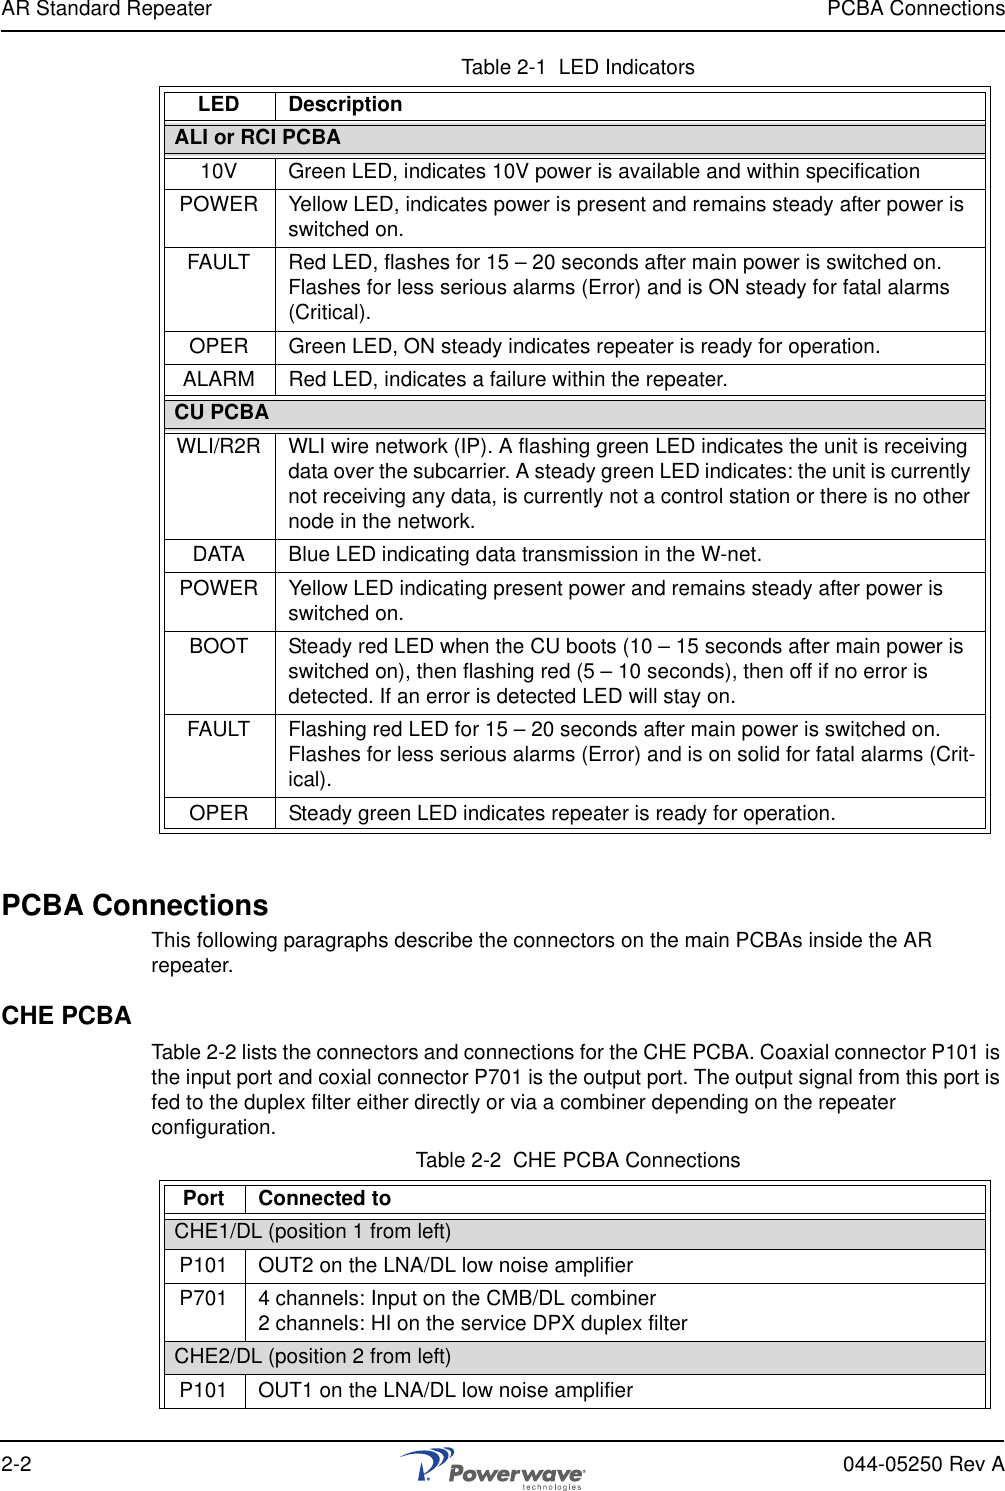 AR Standard Repeater PCBA Connections2-2 044-05250 Rev ATable 2-1  LED IndicatorsPCBA ConnectionsThis following paragraphs describe the connectors on the main PCBAs inside the AR repeater.CHE PCBATable 2-2 lists the connectors and connections for the CHE PCBA. Coaxial connector P101 is the input port and coxial connector P701 is the output port. The output signal from this port is fed to the duplex filter either directly or via a combiner depending on the repeater configuration.Table 2-2  CHE PCBA ConnectionsLED DescriptionALI or RCI PCBA10V Green LED, indicates 10V power is available and within specificationPOWER Yellow LED, indicates power is present and remains steady after power is switched on.FAULT Red LED, flashes for 15 – 20 seconds after main power is switched on. Flashes for less serious alarms (Error) and is ON steady for fatal alarms (Critical).OPER Green LED, ON steady indicates repeater is ready for operation.ALARM Red LED, indicates a failure within the repeater.CU PCBAWLI/R2R WLI wire network (IP). A flashing green LED indicates the unit is receiving data over the subcarrier. A steady green LED indicates: the unit is currently not receiving any data, is currently not a control station or there is no other node in the network.DATA Blue LED indicating data transmission in the W-net.POWER Yellow LED indicating present power and remains steady after power is switched on.BOOT Steady red LED when the CU boots (10 – 15 seconds after main power is switched on), then flashing red (5 – 10 seconds), then off if no error is detected. If an error is detected LED will stay on.FAULT Flashing red LED for 15 – 20 seconds after main power is switched on. Flashes for less serious alarms (Error) and is on solid for fatal alarms (Crit-ical).OPER Steady green LED indicates repeater is ready for operation.Port Connected toCHE1/DL (position 1 from left)P101 OUT2 on the LNA/DL low noise amplifierP701 4 channels: Input on the CMB/DL combiner2 channels: HI on the service DPX duplex filterCHE2/DL (position 2 from left)P101 OUT1 on the LNA/DL low noise amplifier